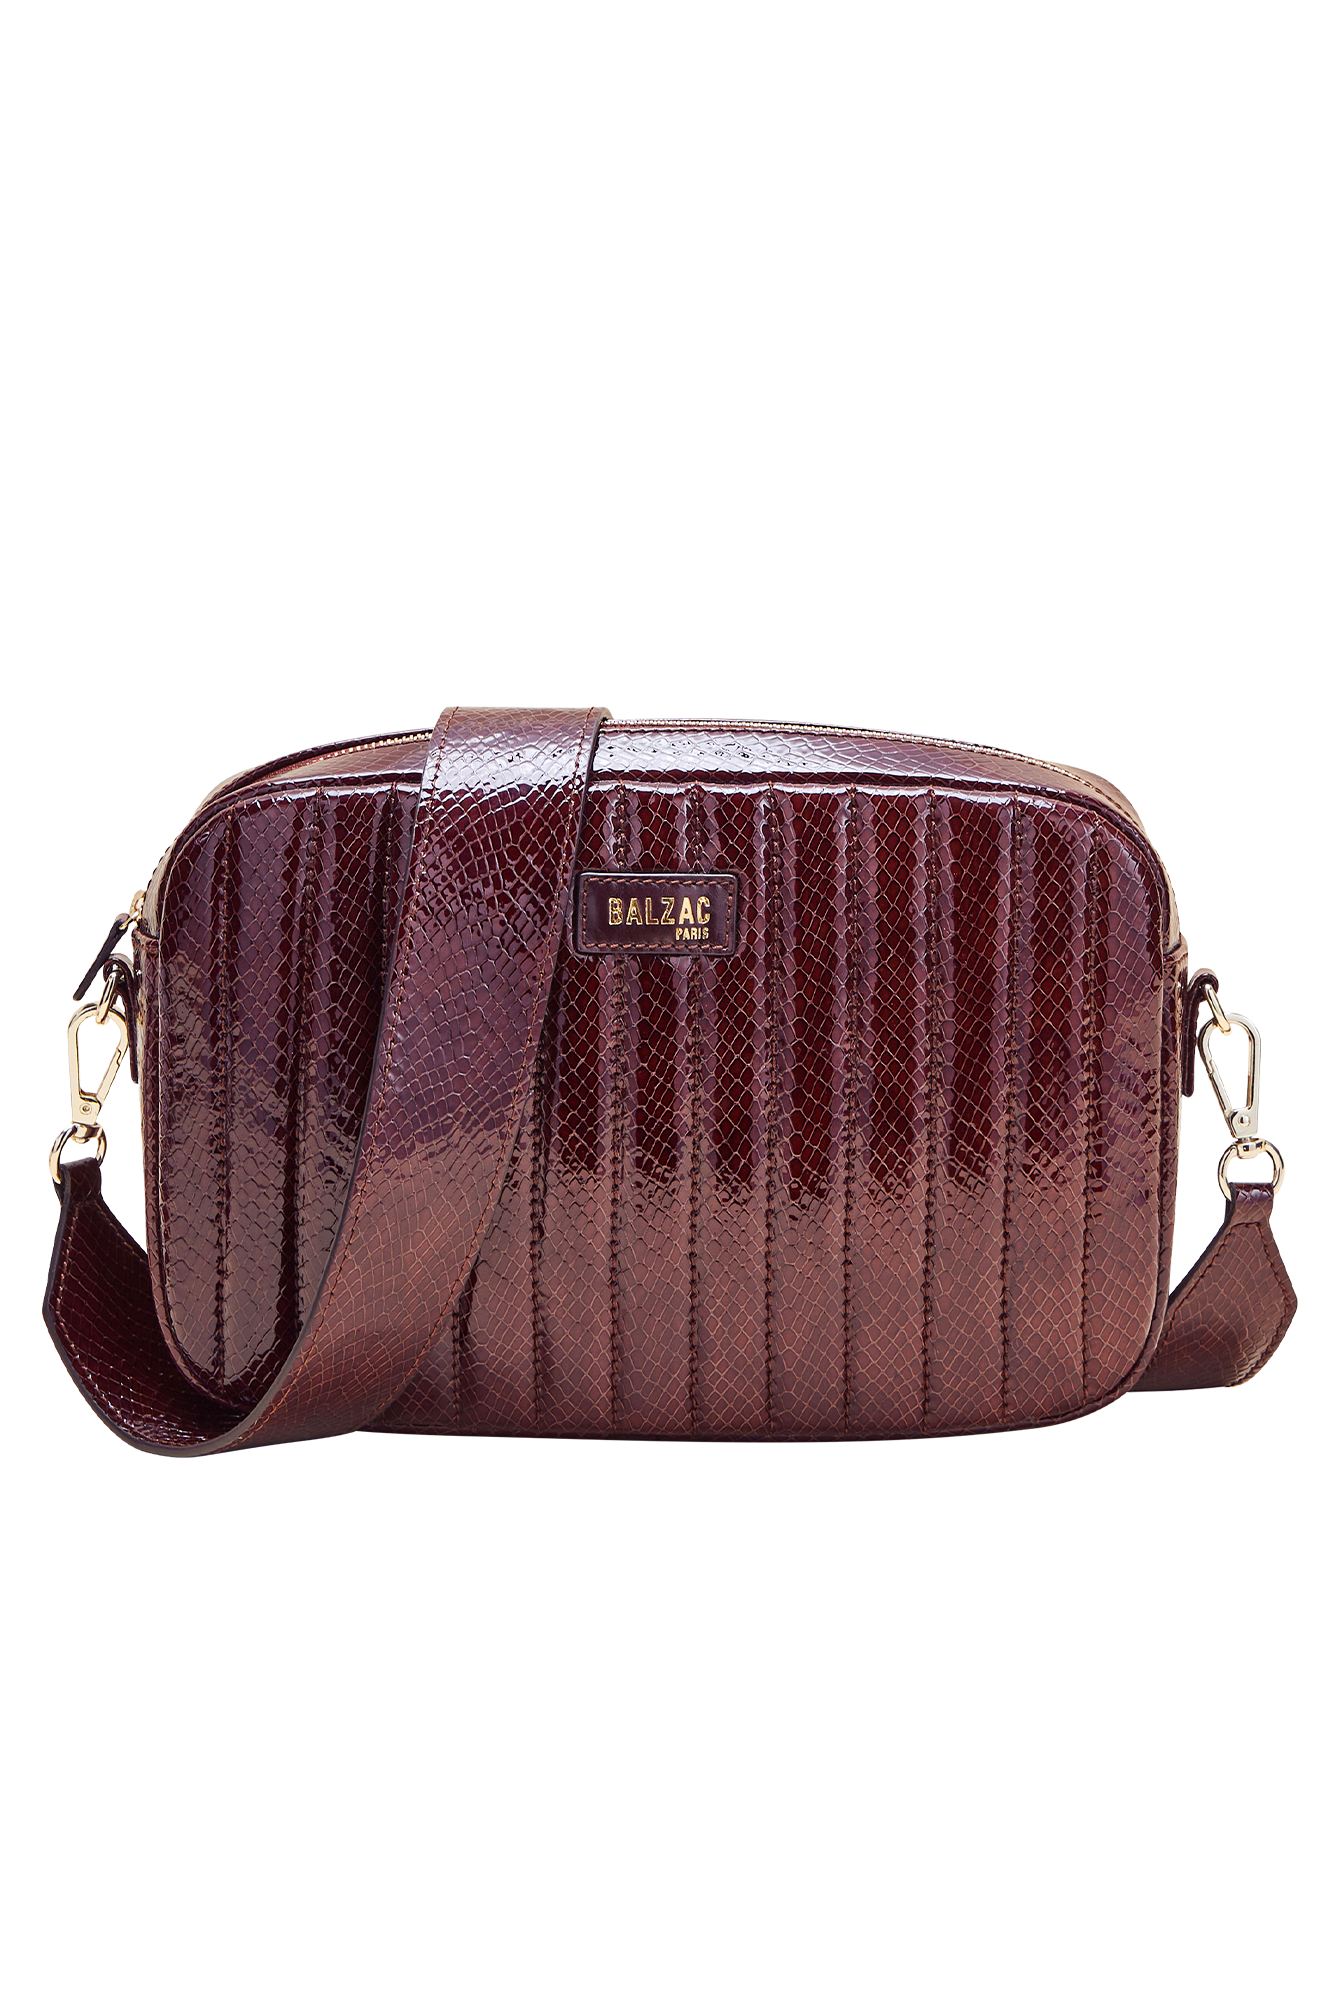 Grand César bag embossed with chocolate varnish